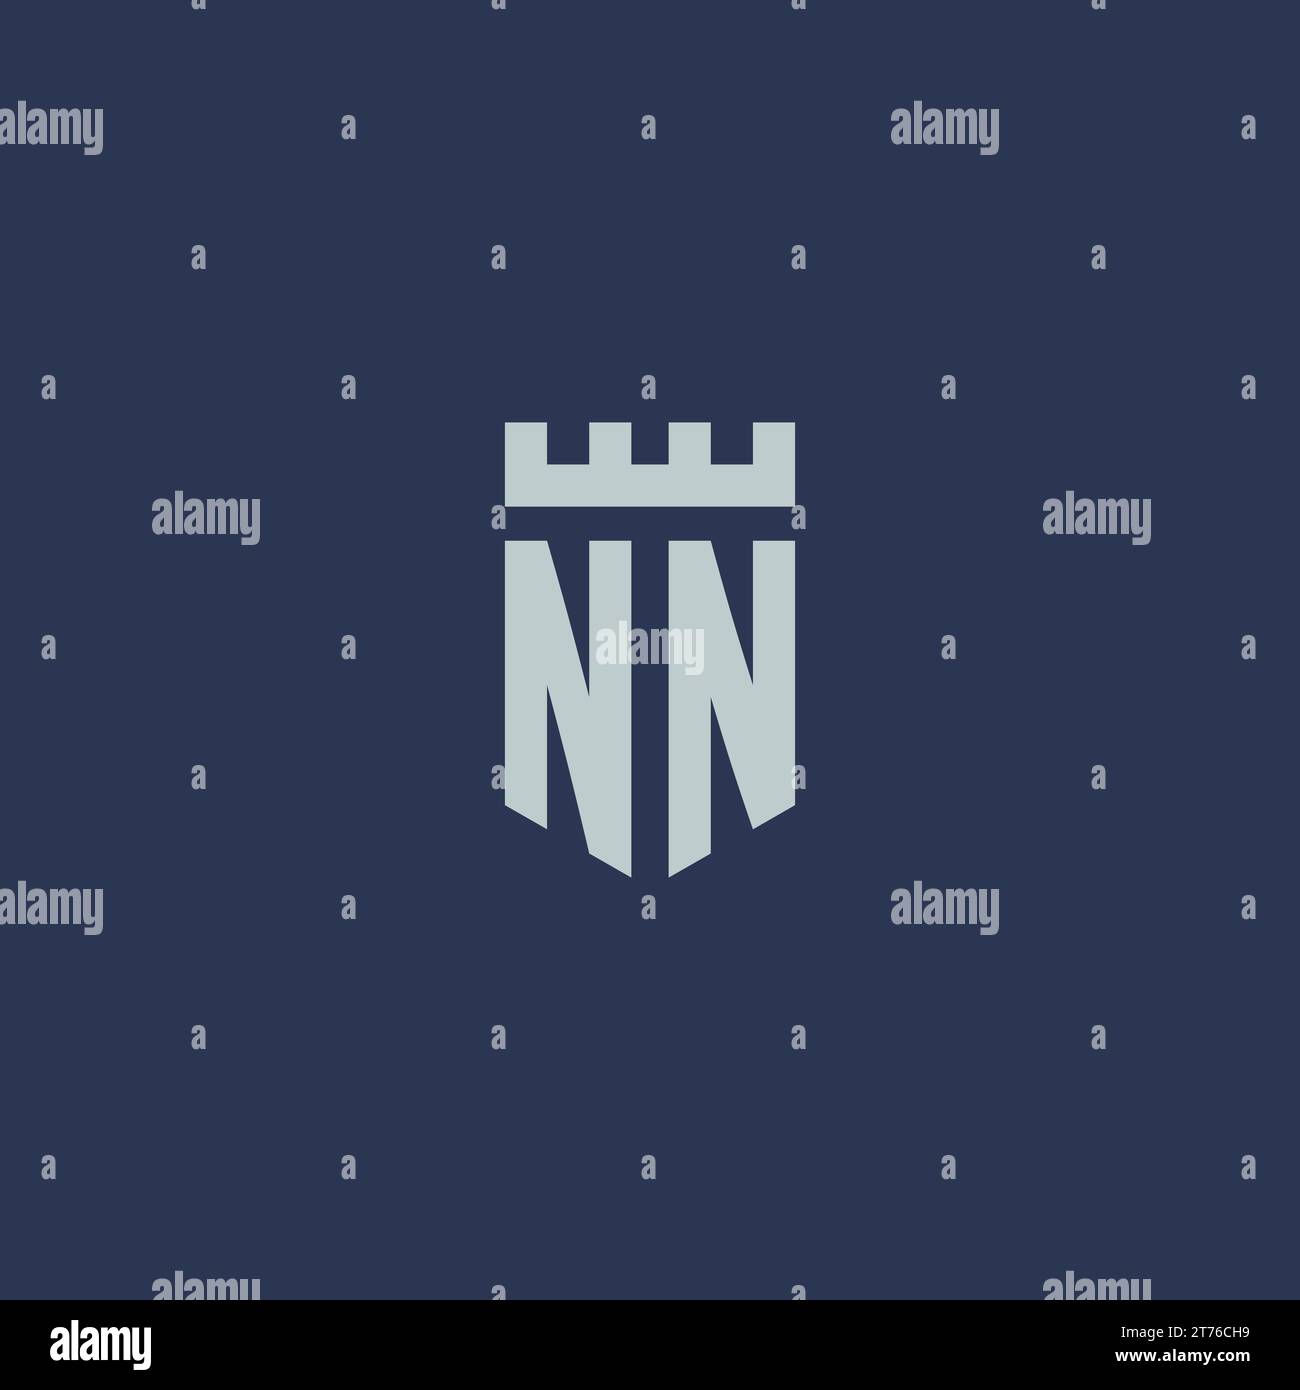 NN logo monogram with fortress castle and shield style design ideas Stock Vector